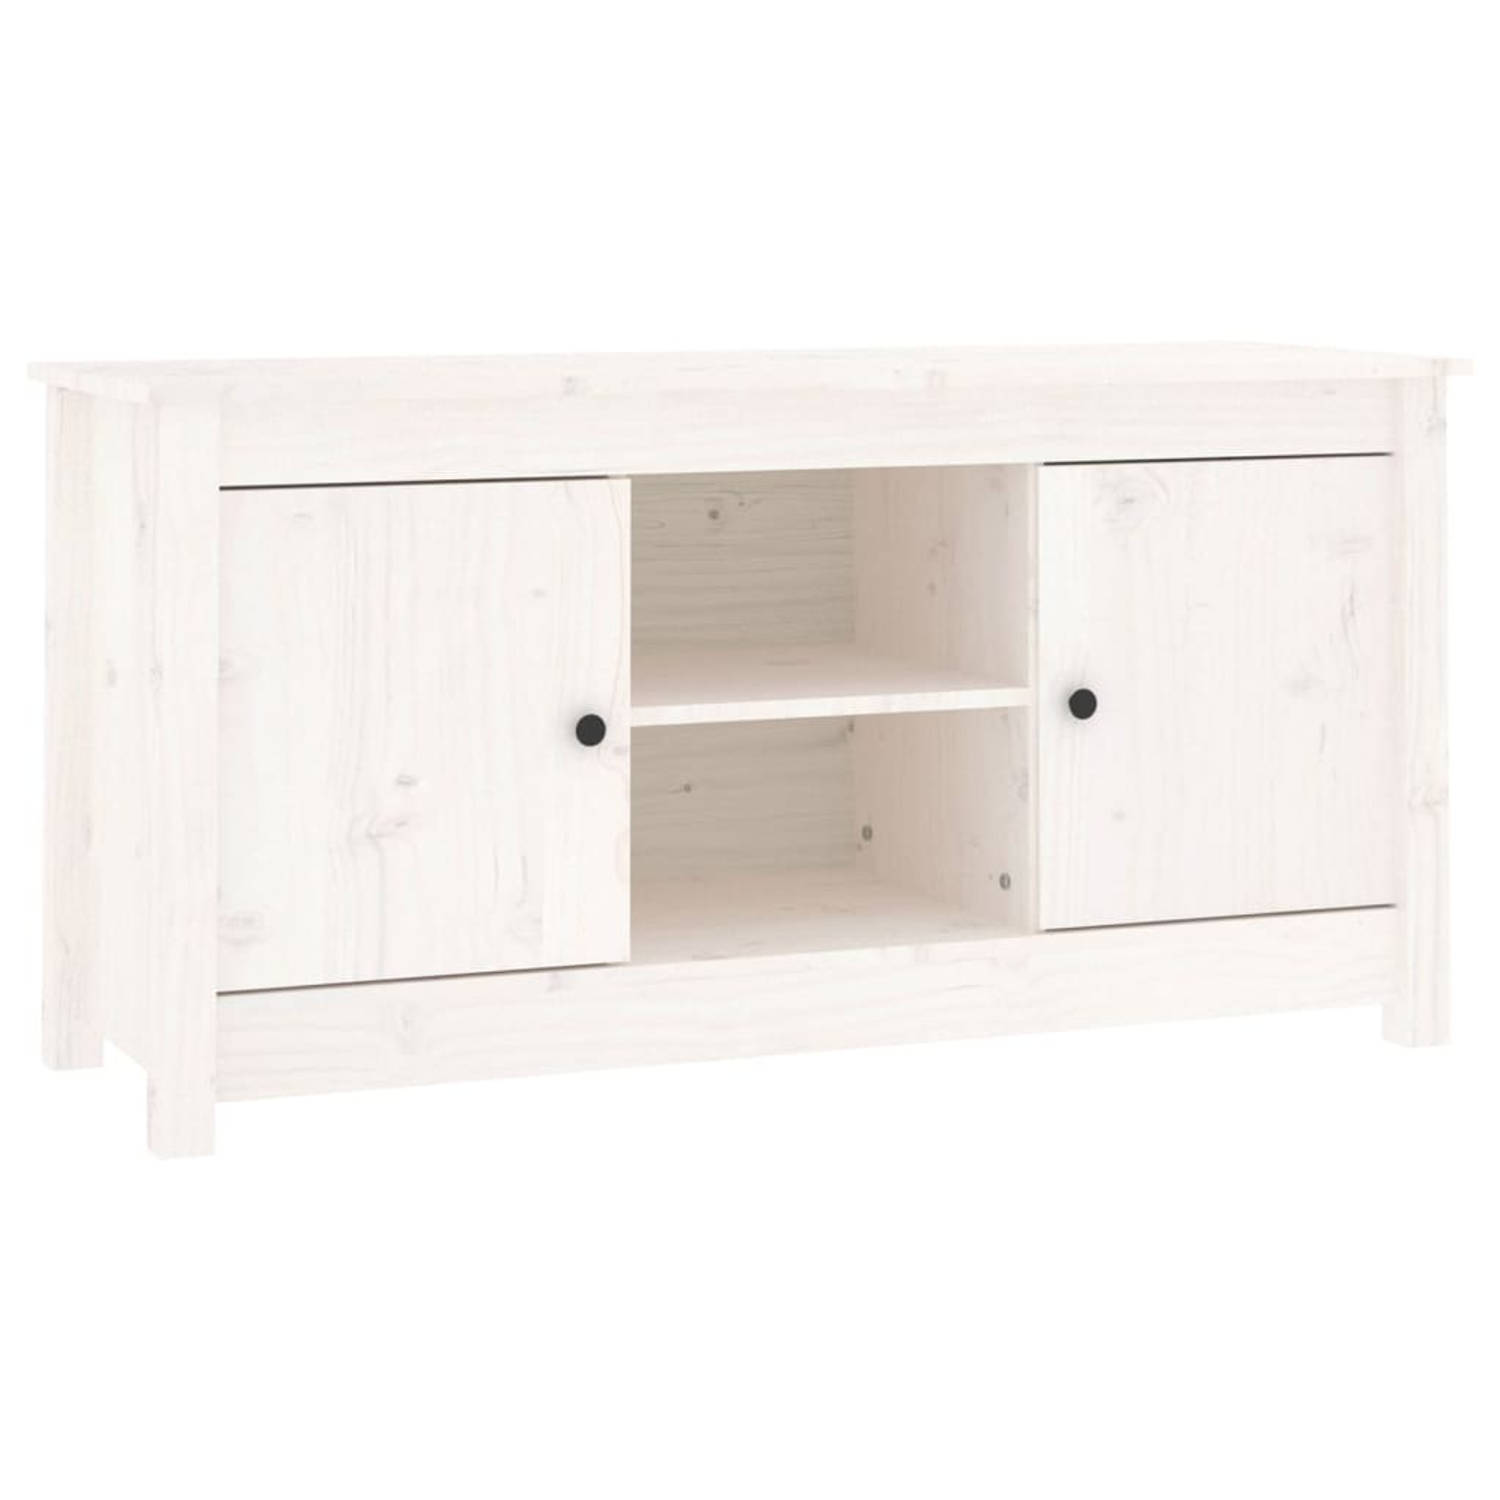 - The Living Store TV-kast Serie Trendy Massief Grenenhout - 103 x 36.5 x 52 cm - Wit